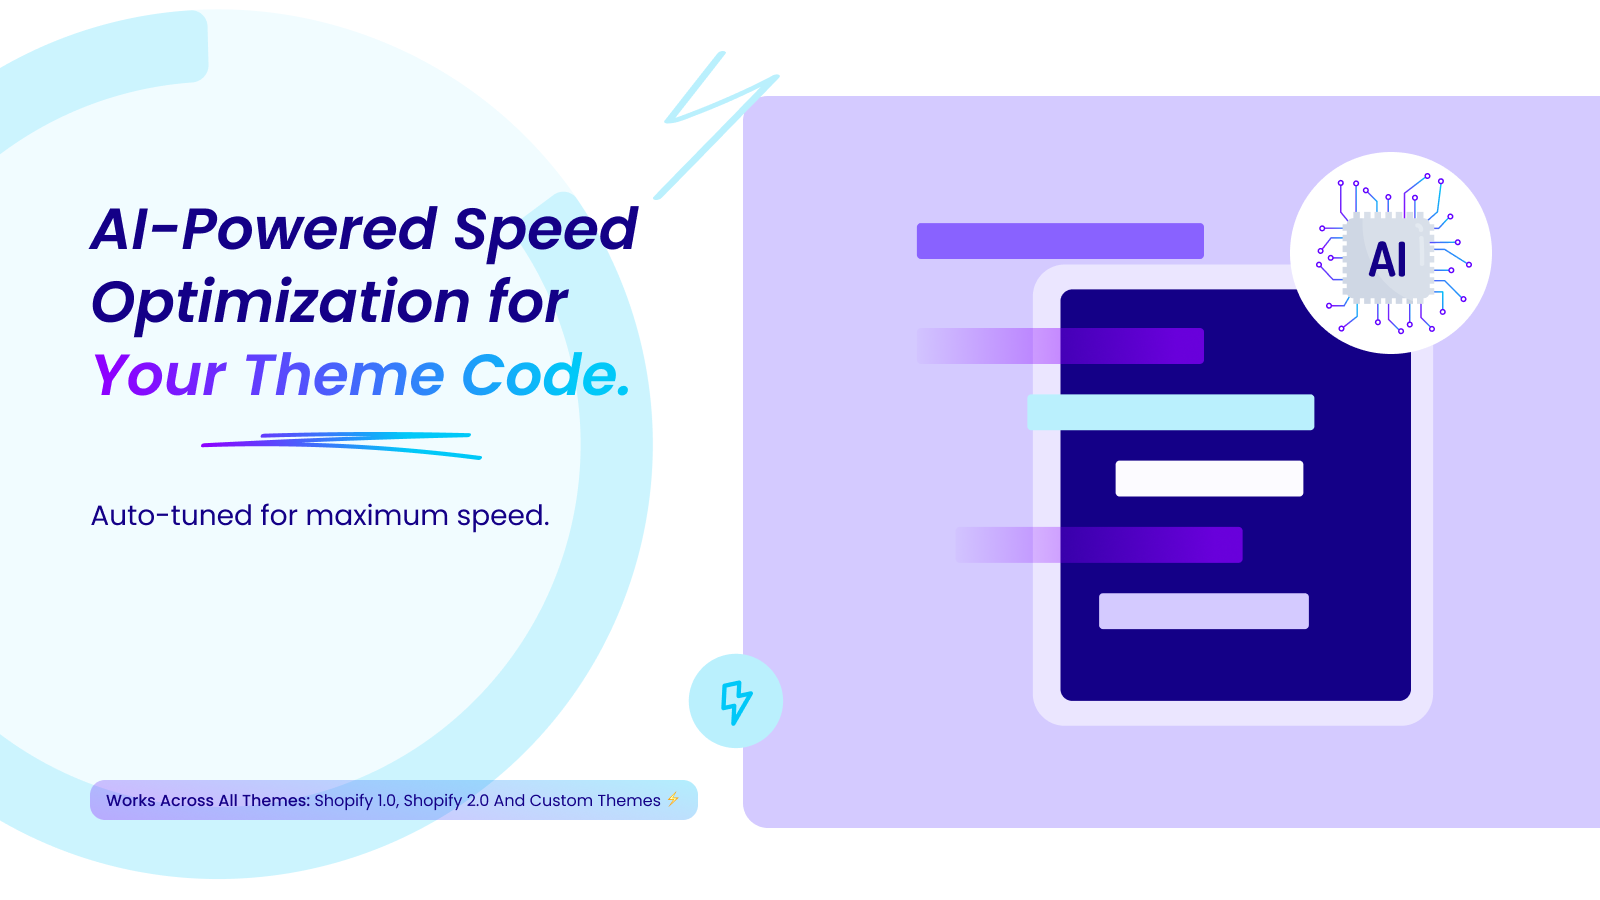 AI-Powered Speed Optimization for Your Theme Code